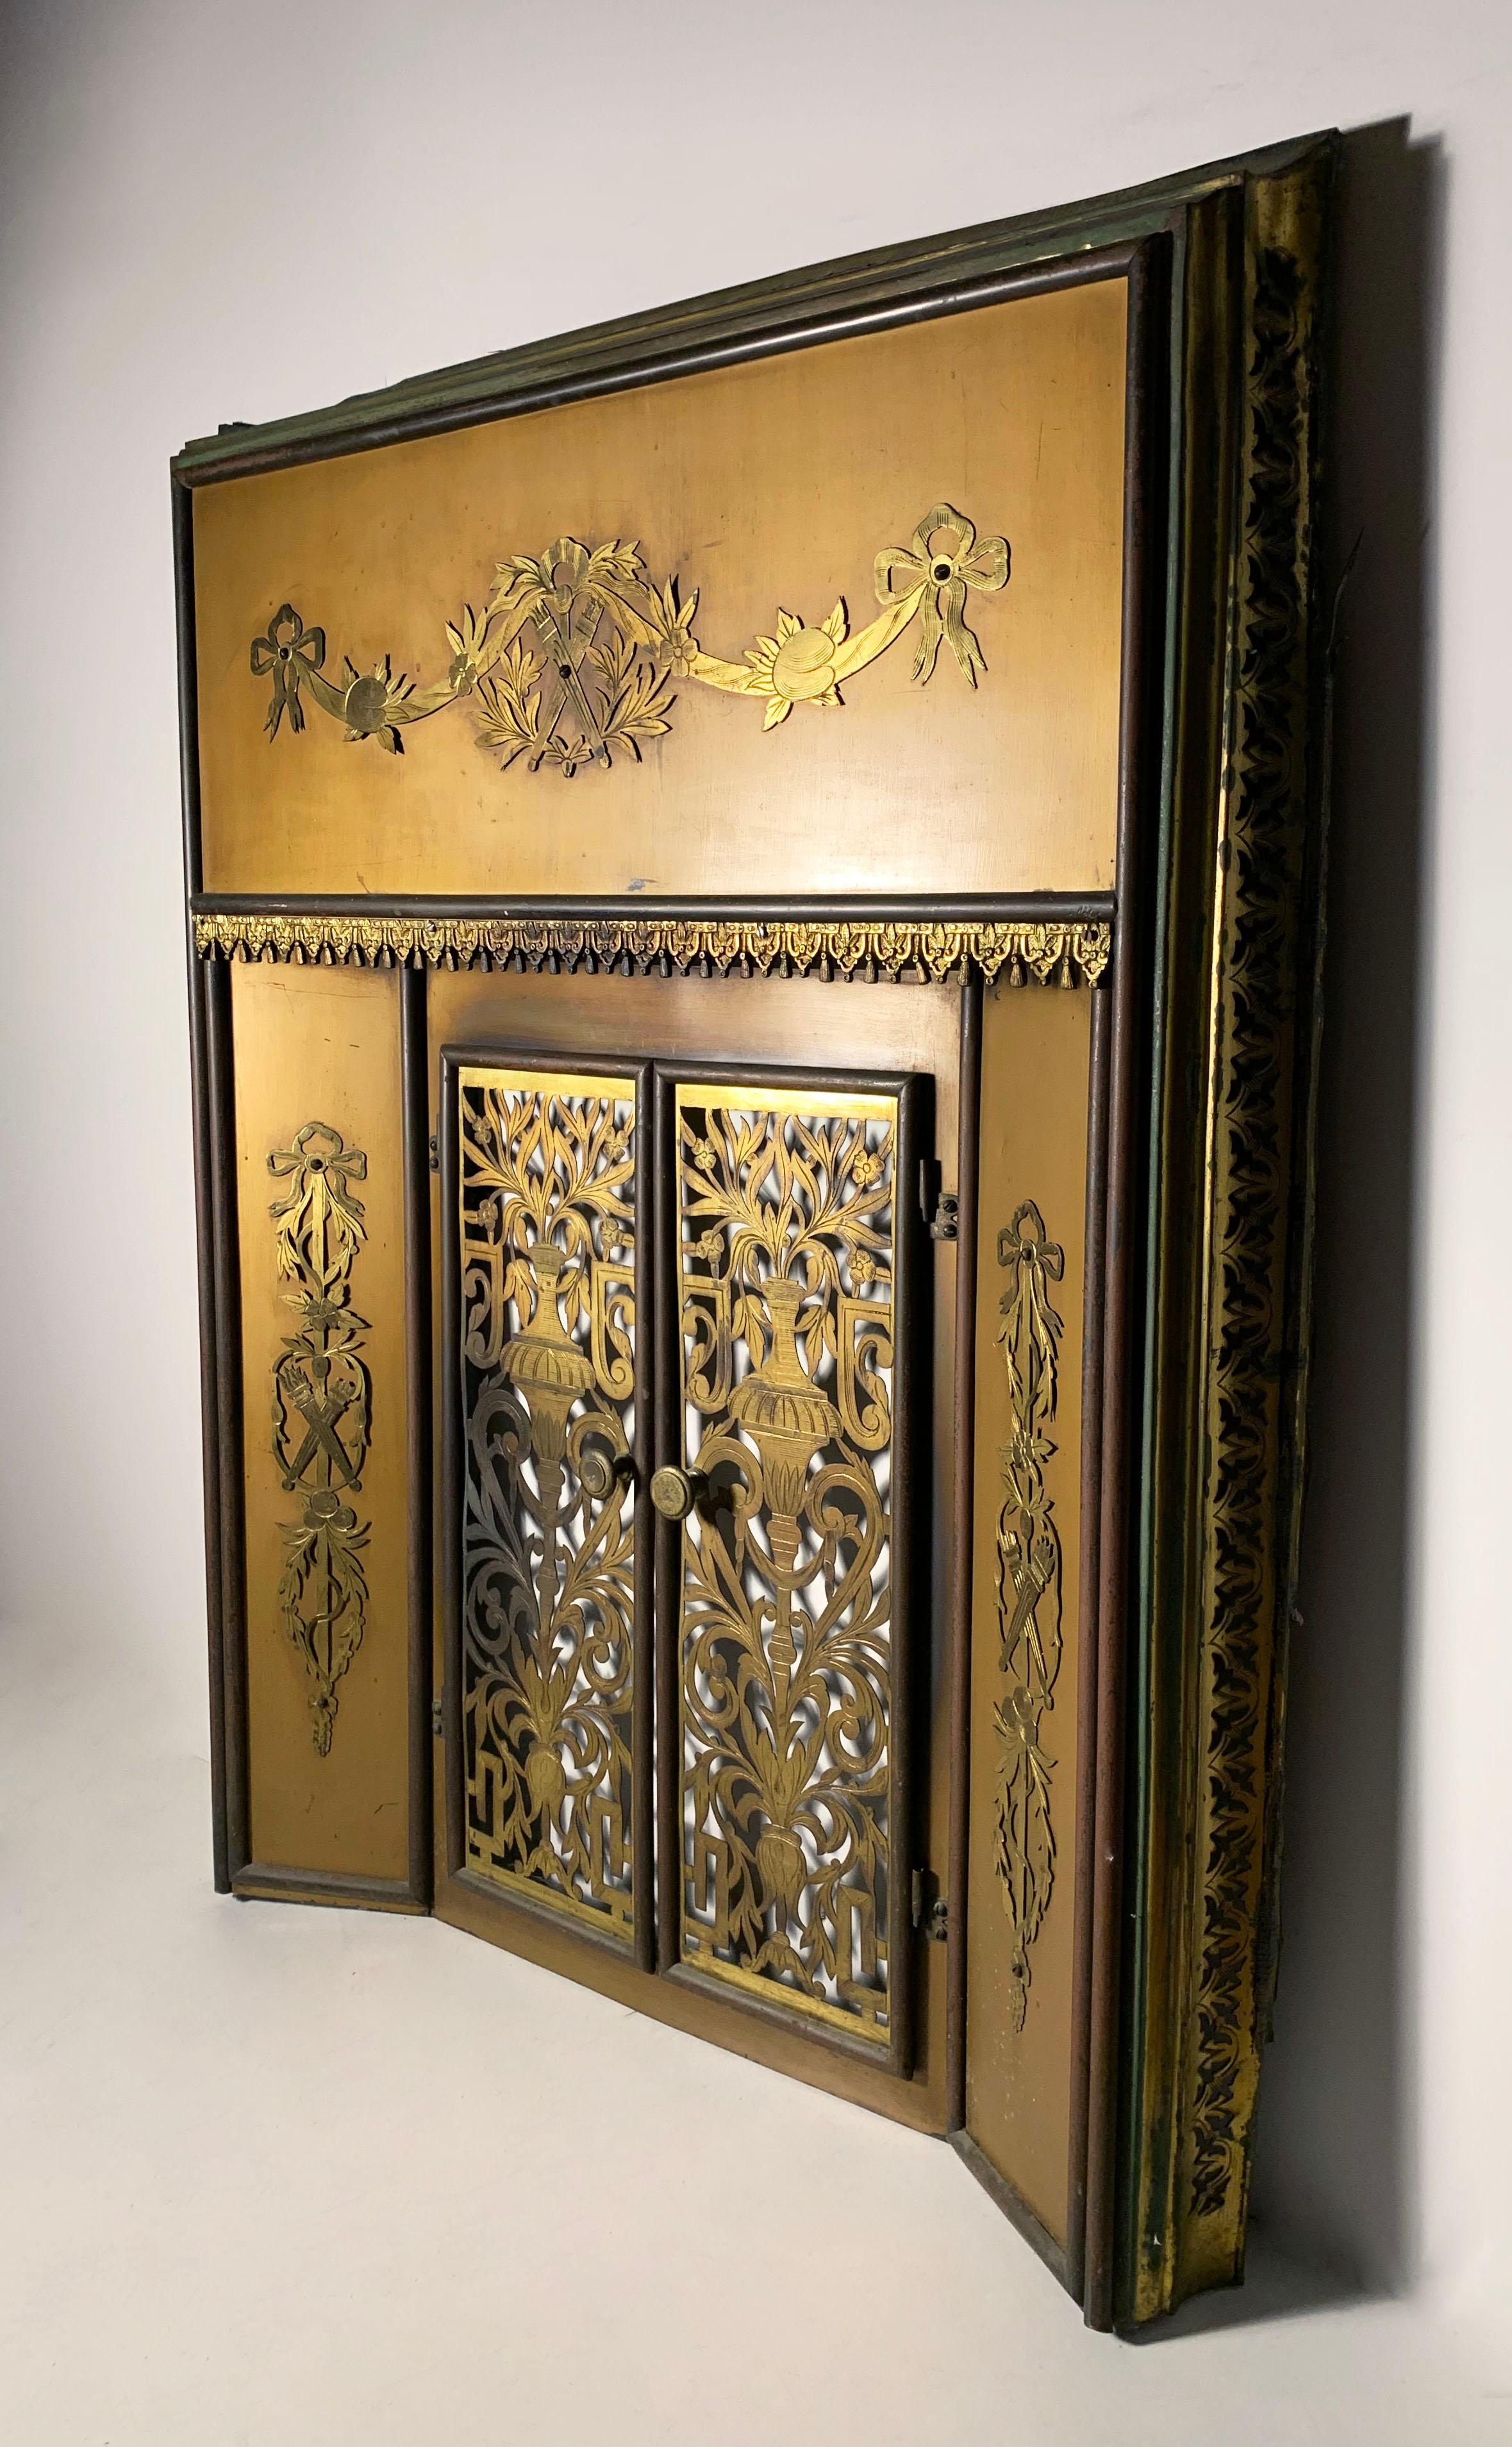 Brass Antique French Bronze Fire Place Screen Insert Surround Fireplace